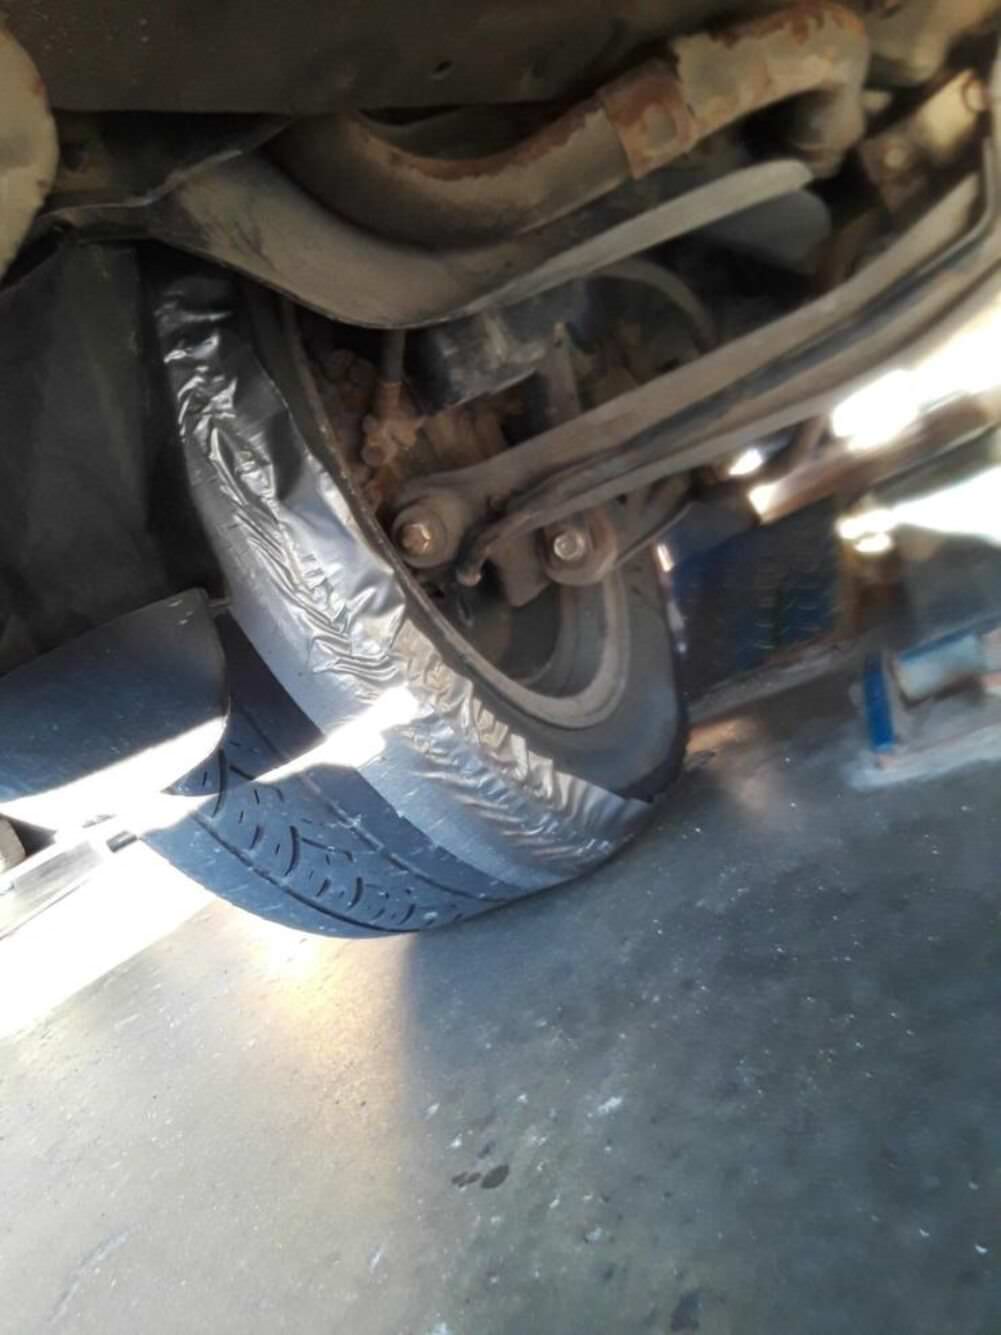 fixed the tire